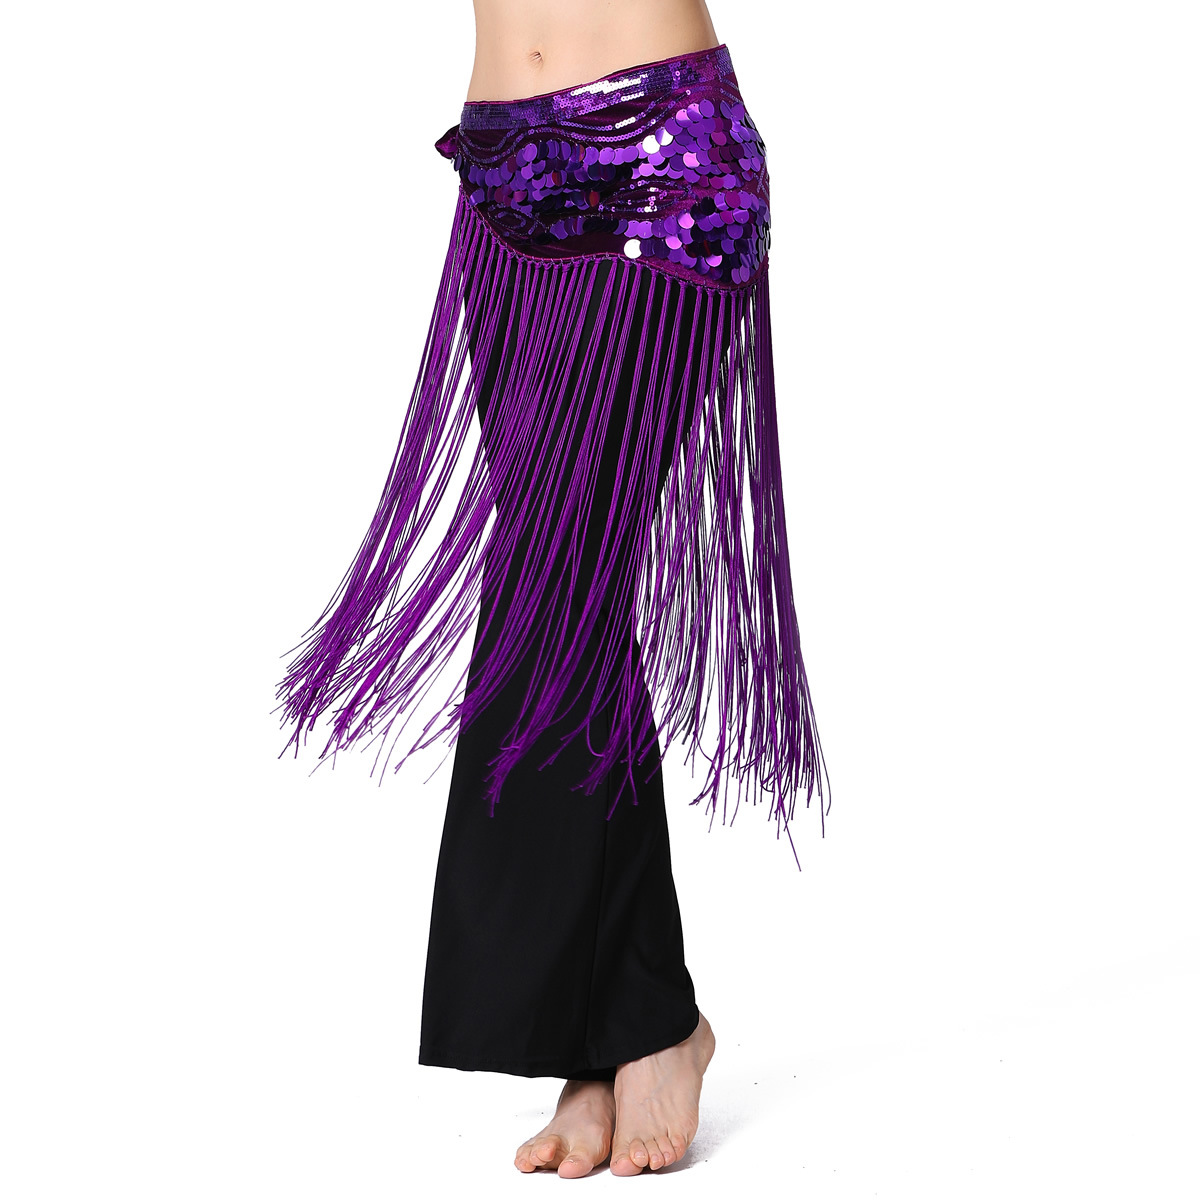 24 Ways to Wear a Hip Scarf - belly dance easy costuming